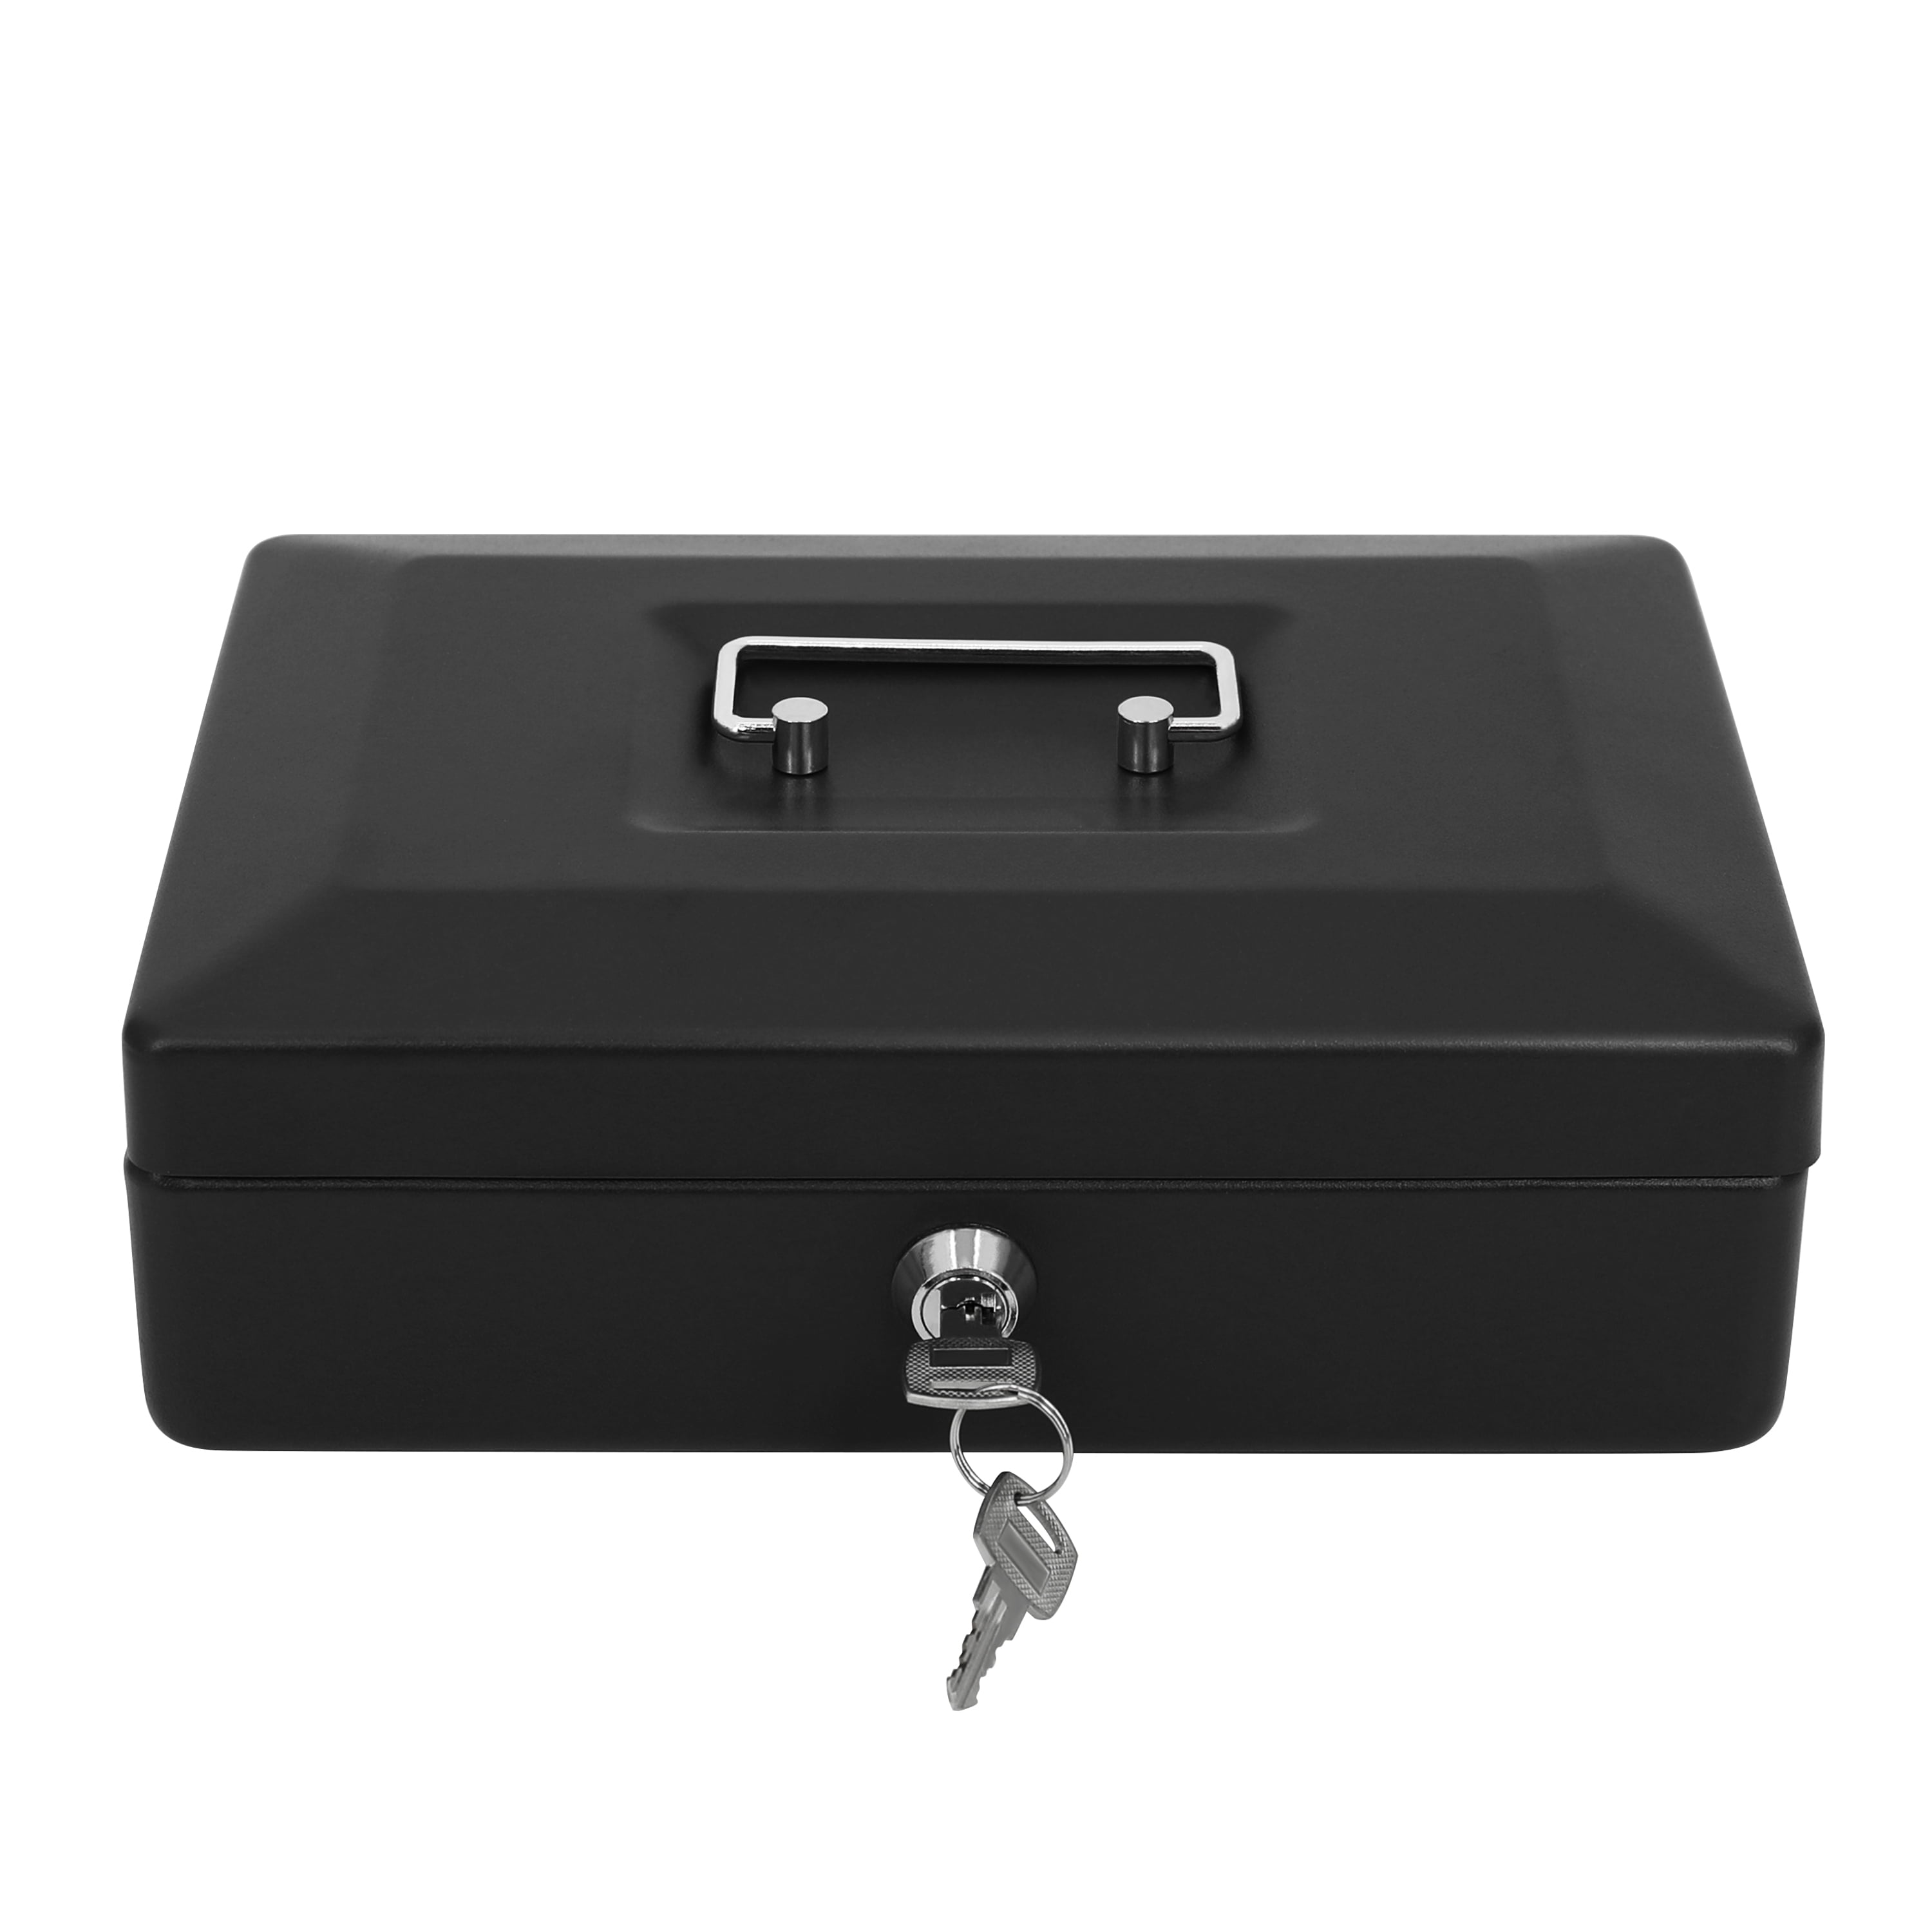 Small Metal Safe Cash Money Box With 2 Security Key Lock and Tray for Kids Pink 